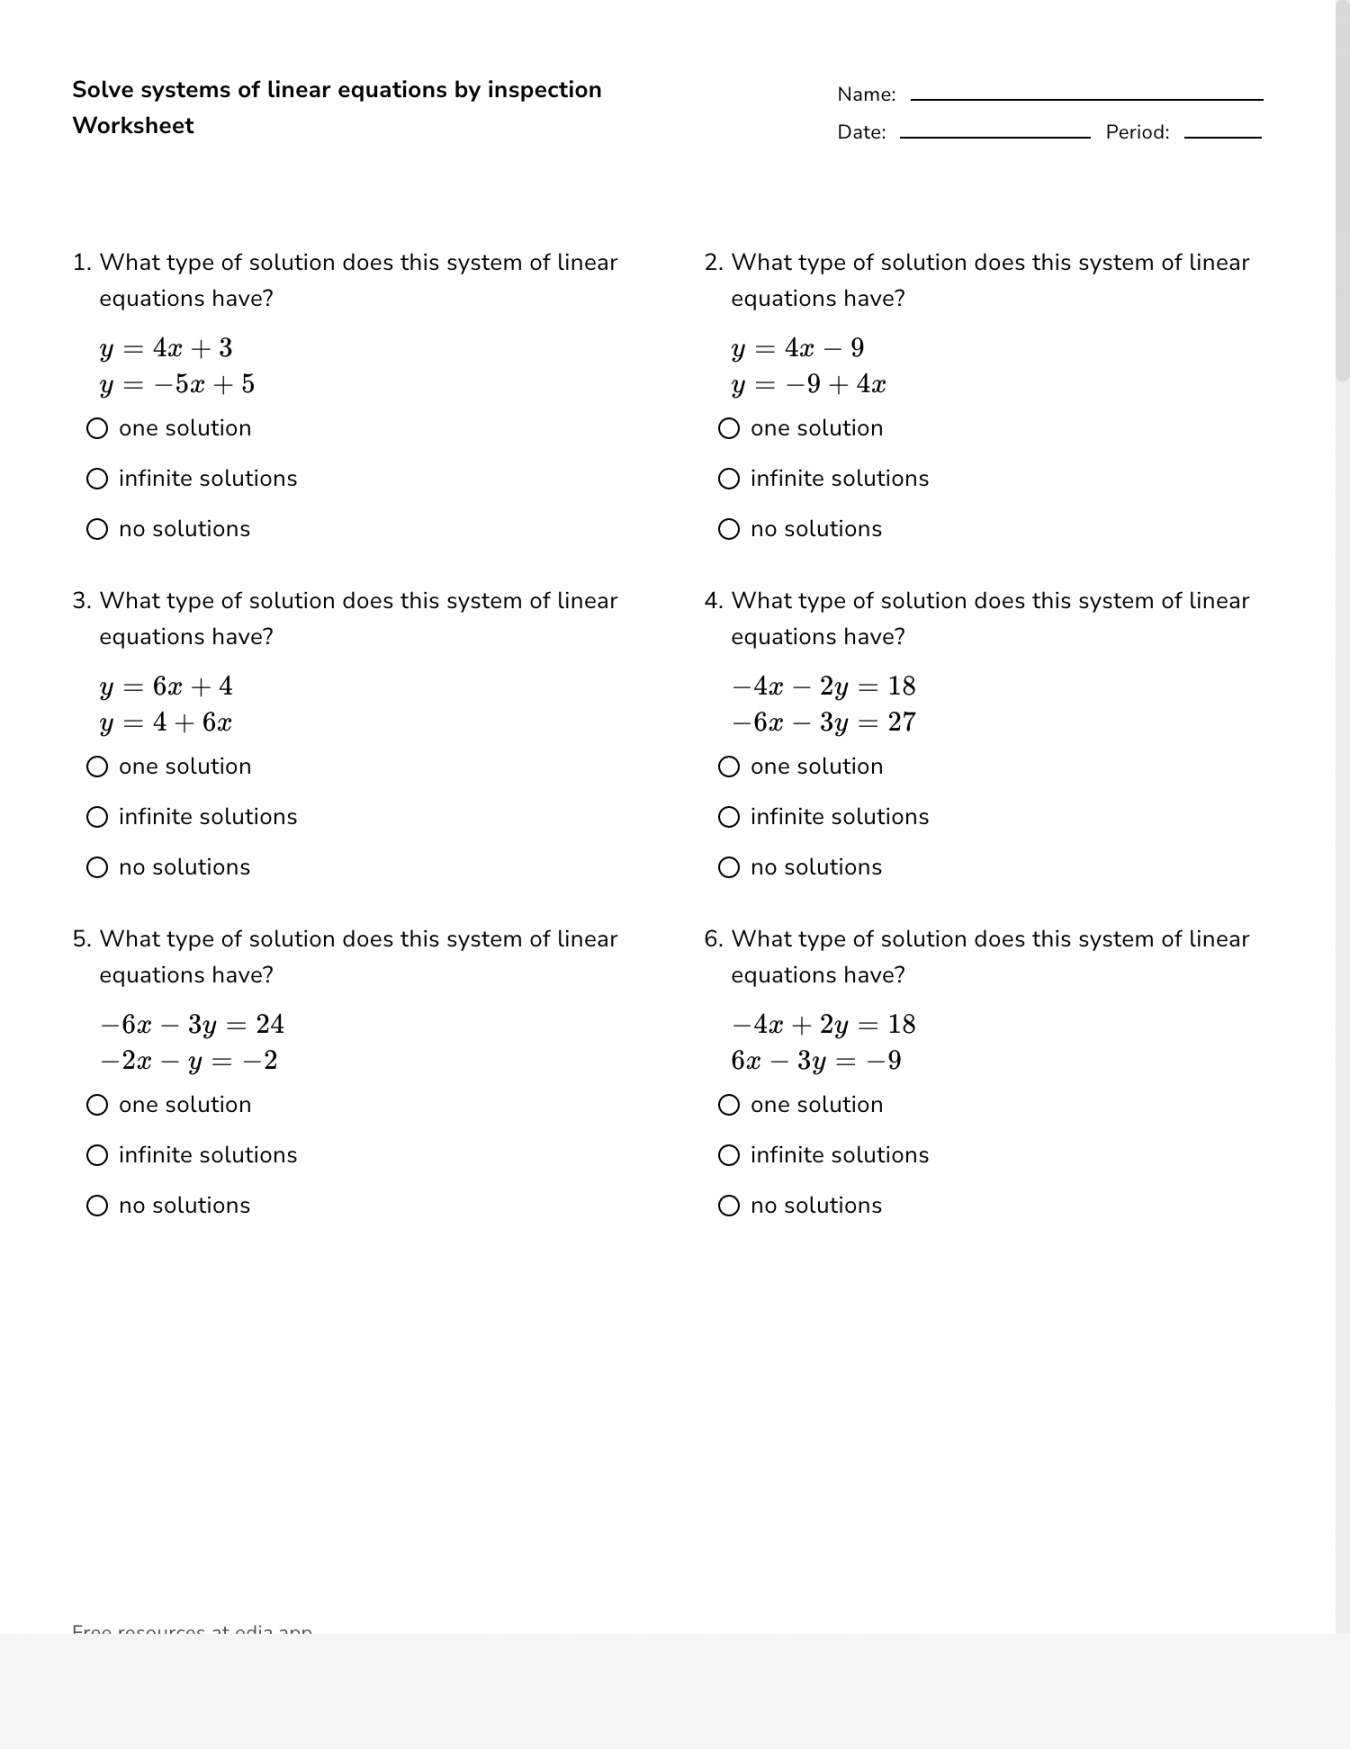 Solve Systems Of Linear Equations By Inspection - Worksheet